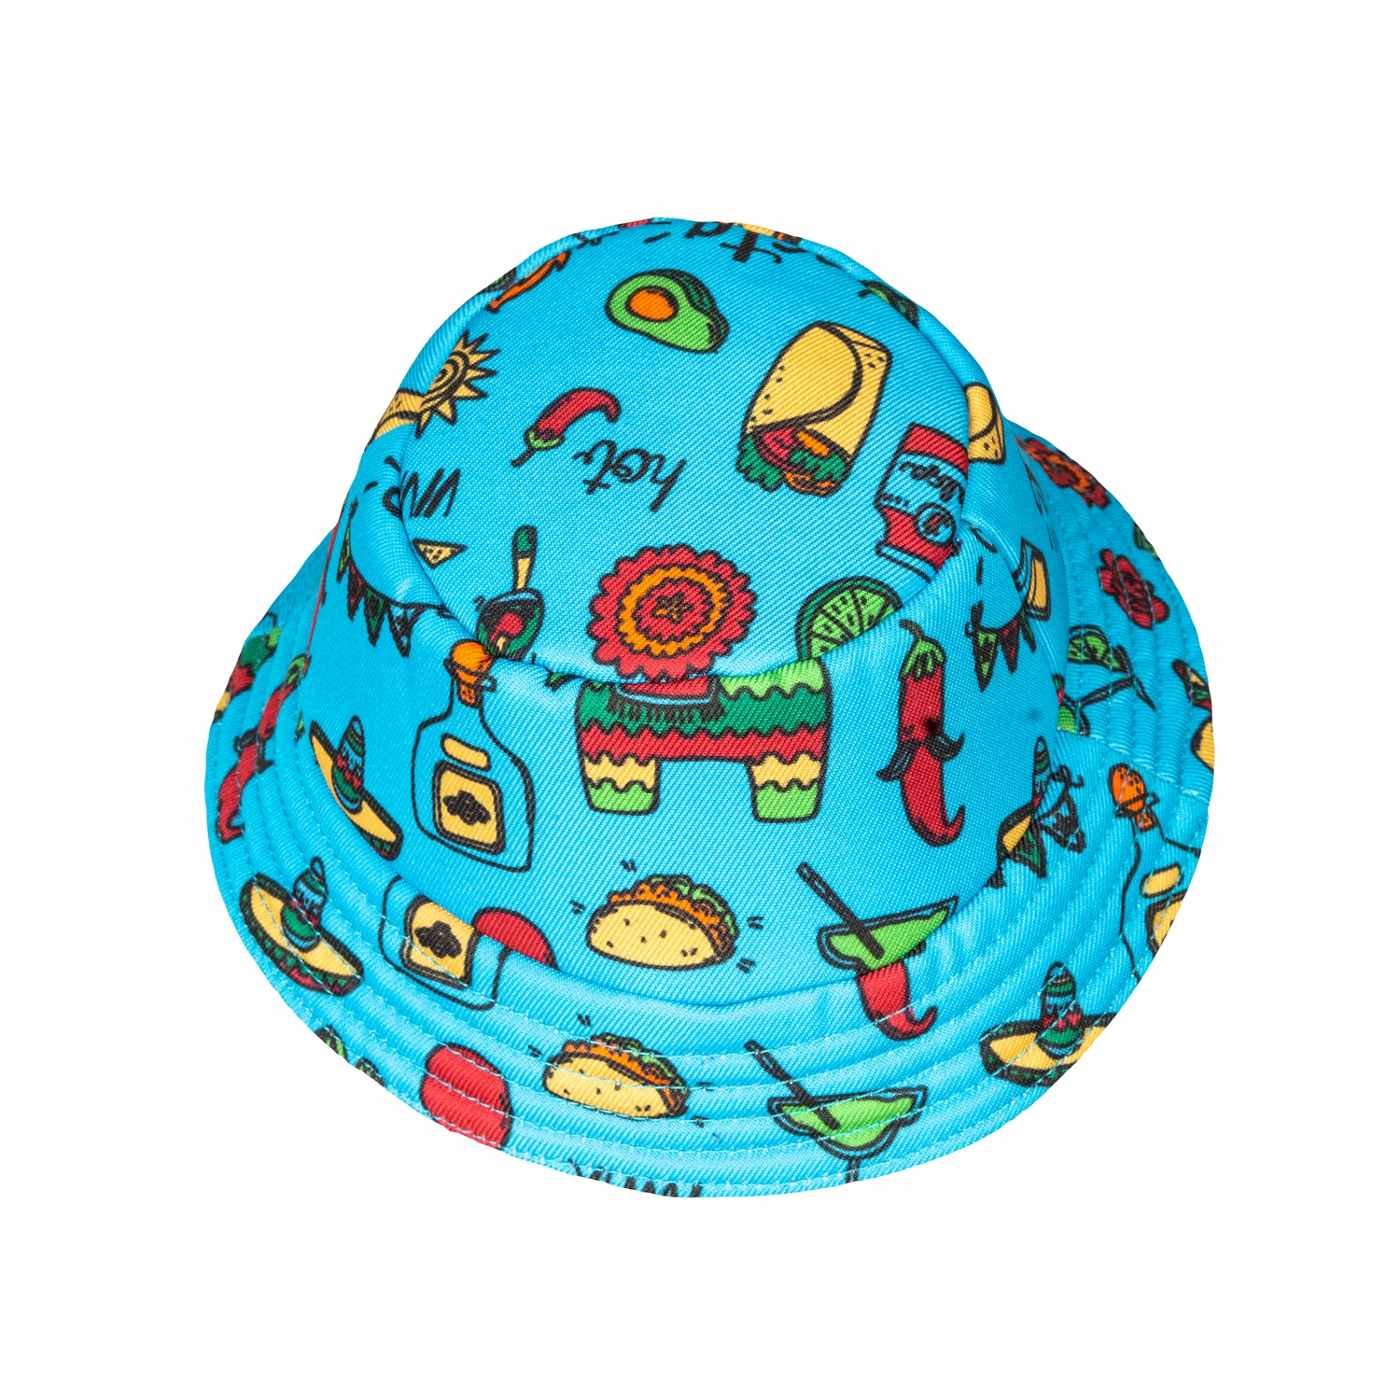 Simply Dog Blue Fiesta Icon Bucket Hat; image 2 of 2